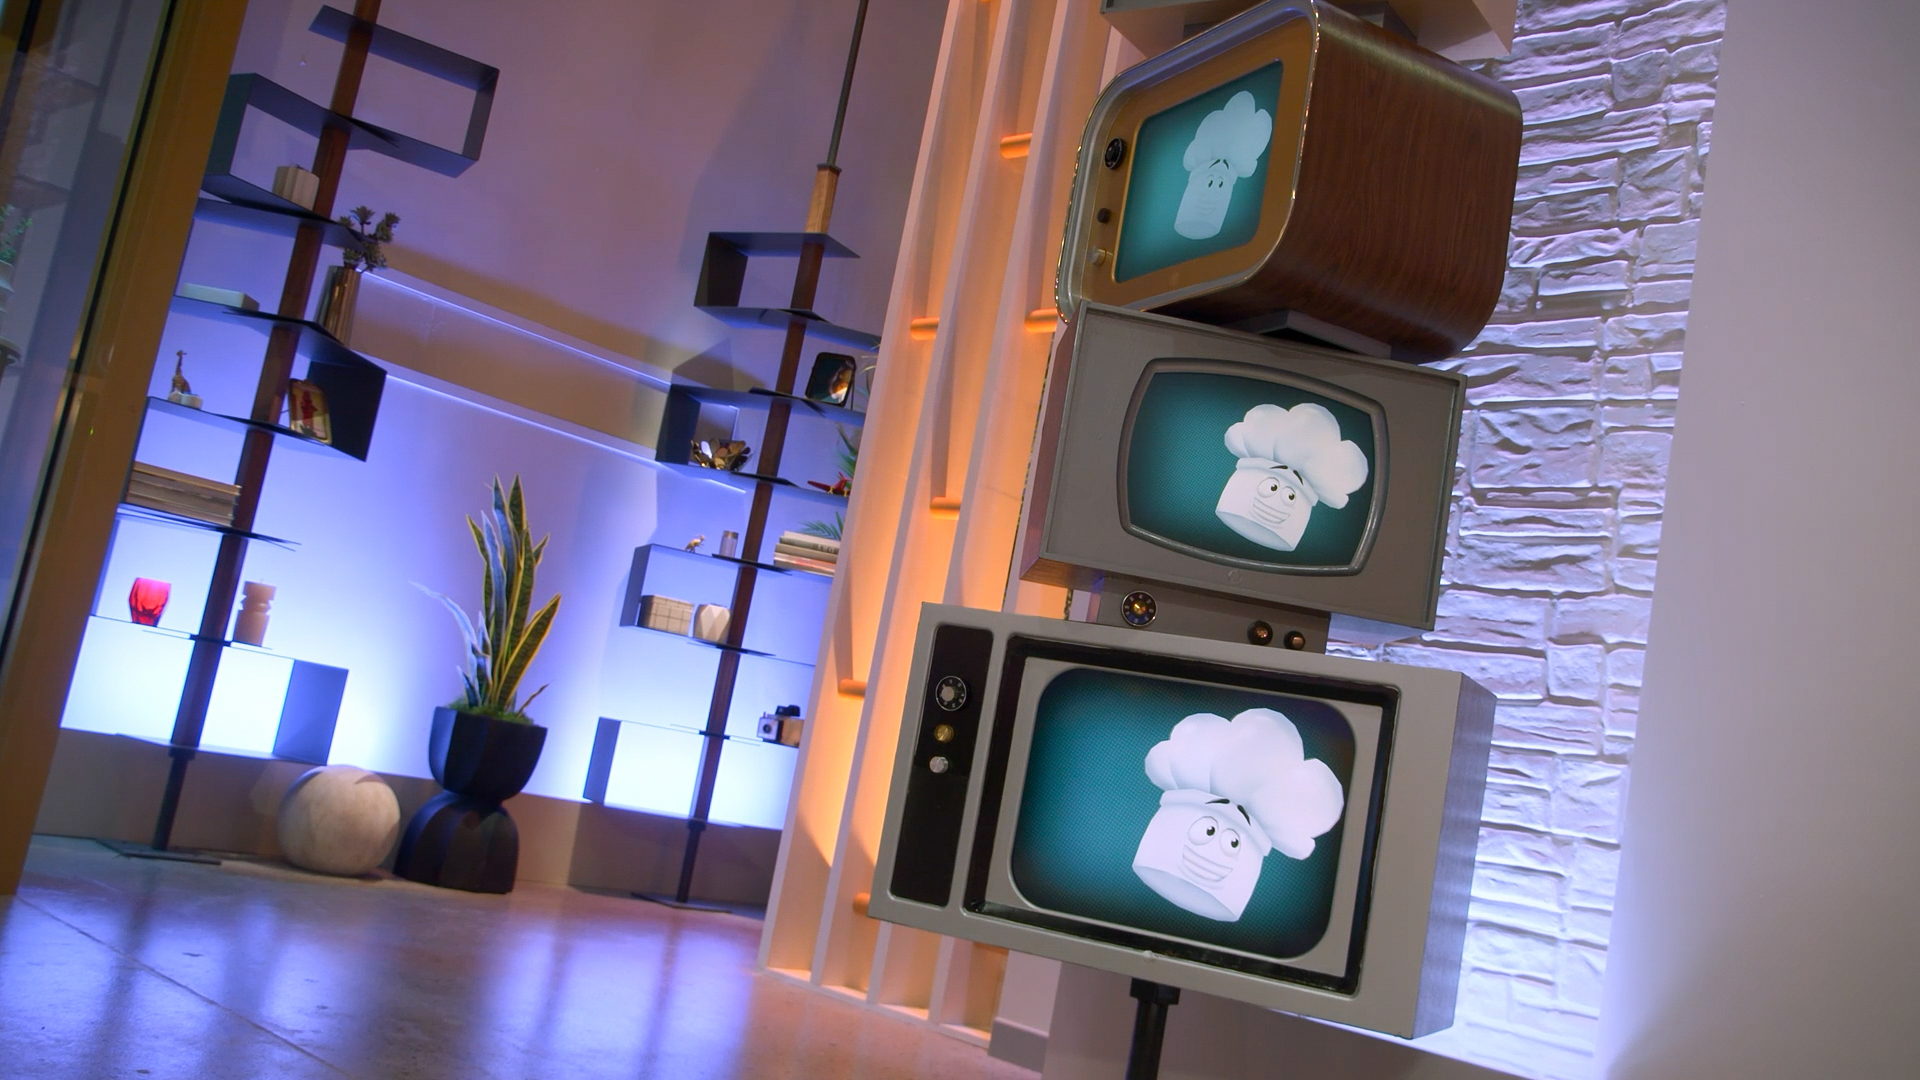 Three TVs stacked with an animated chef’s hat